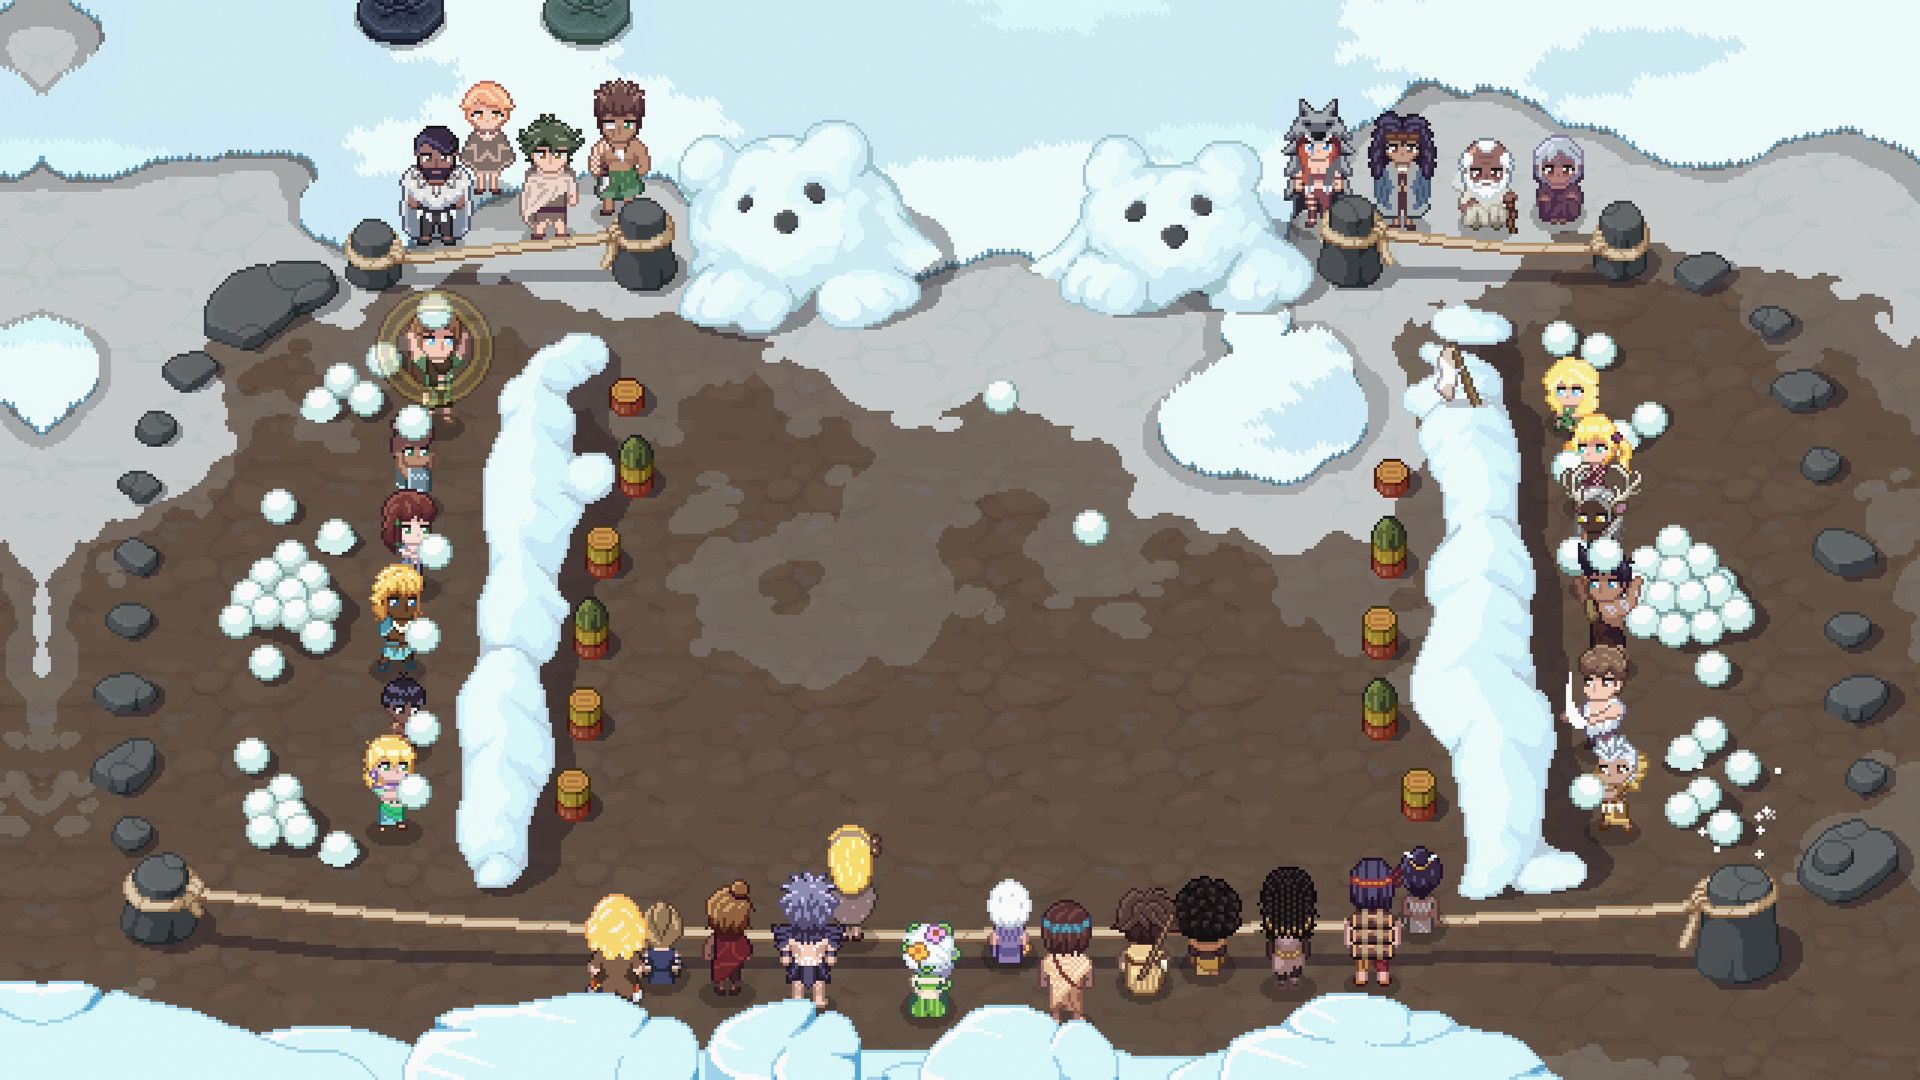 Roots of Pacha Snowball Fight event at the Winter Festival.